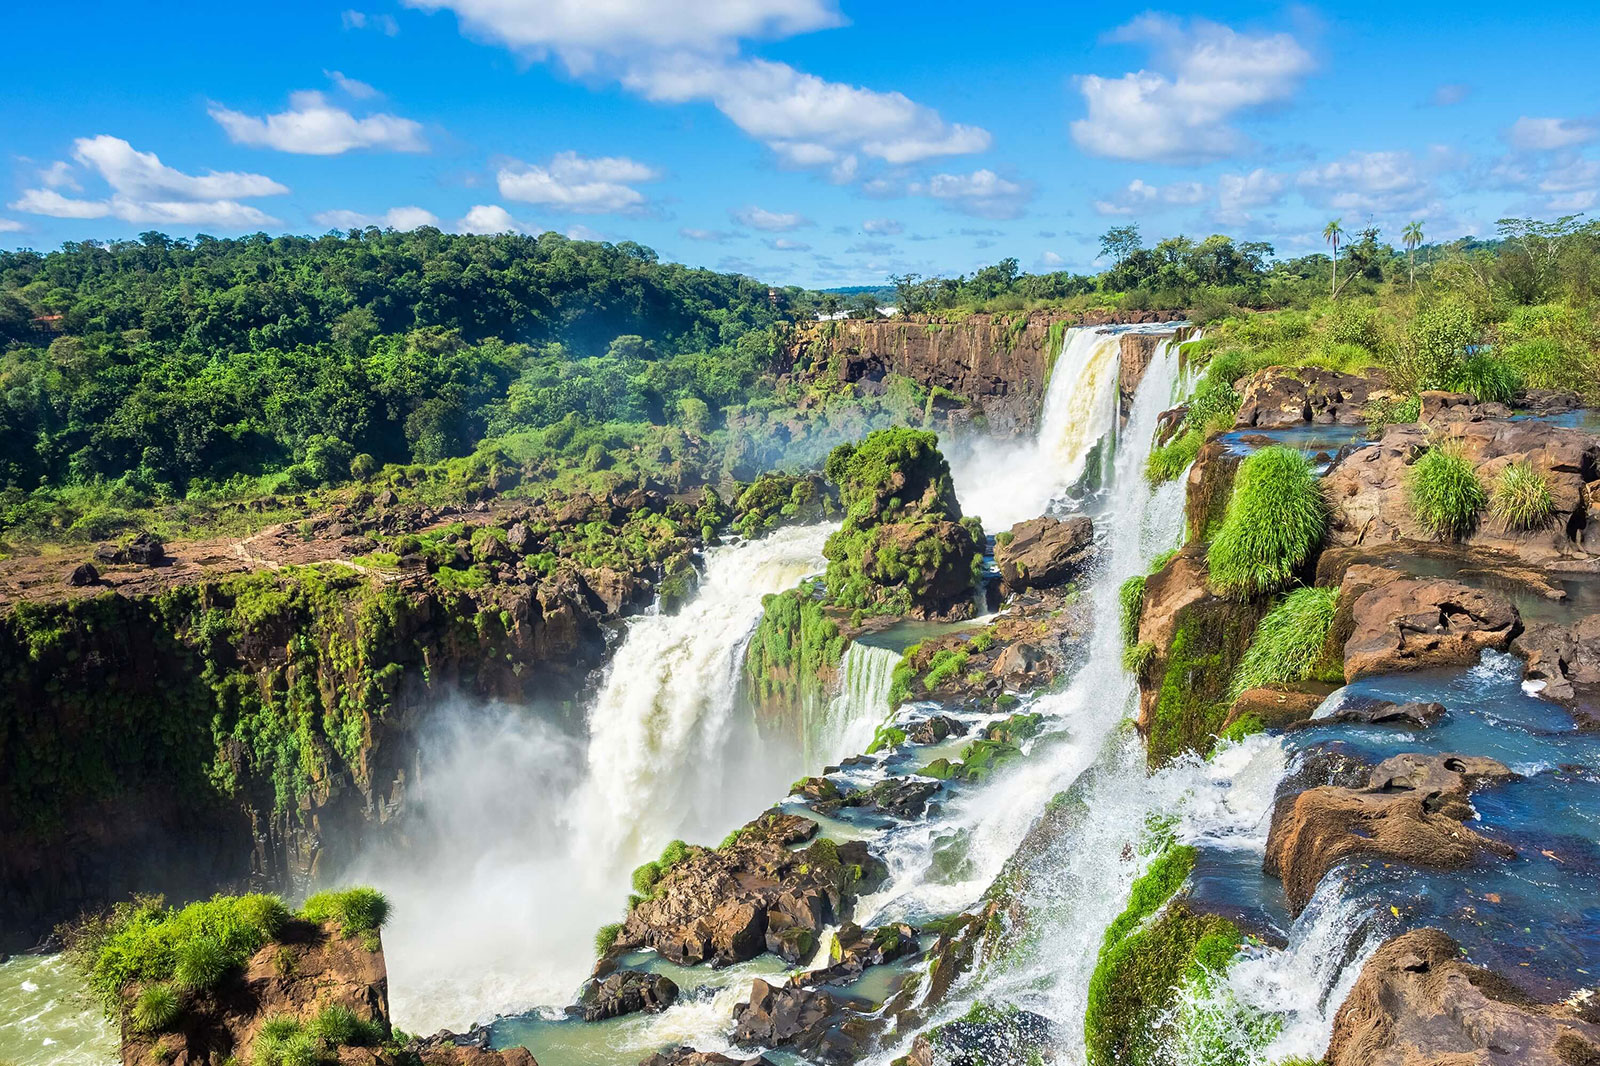 🗺 Can You Locate 18/24 of These Countries in the World? Iguaza Falls, Paraguay